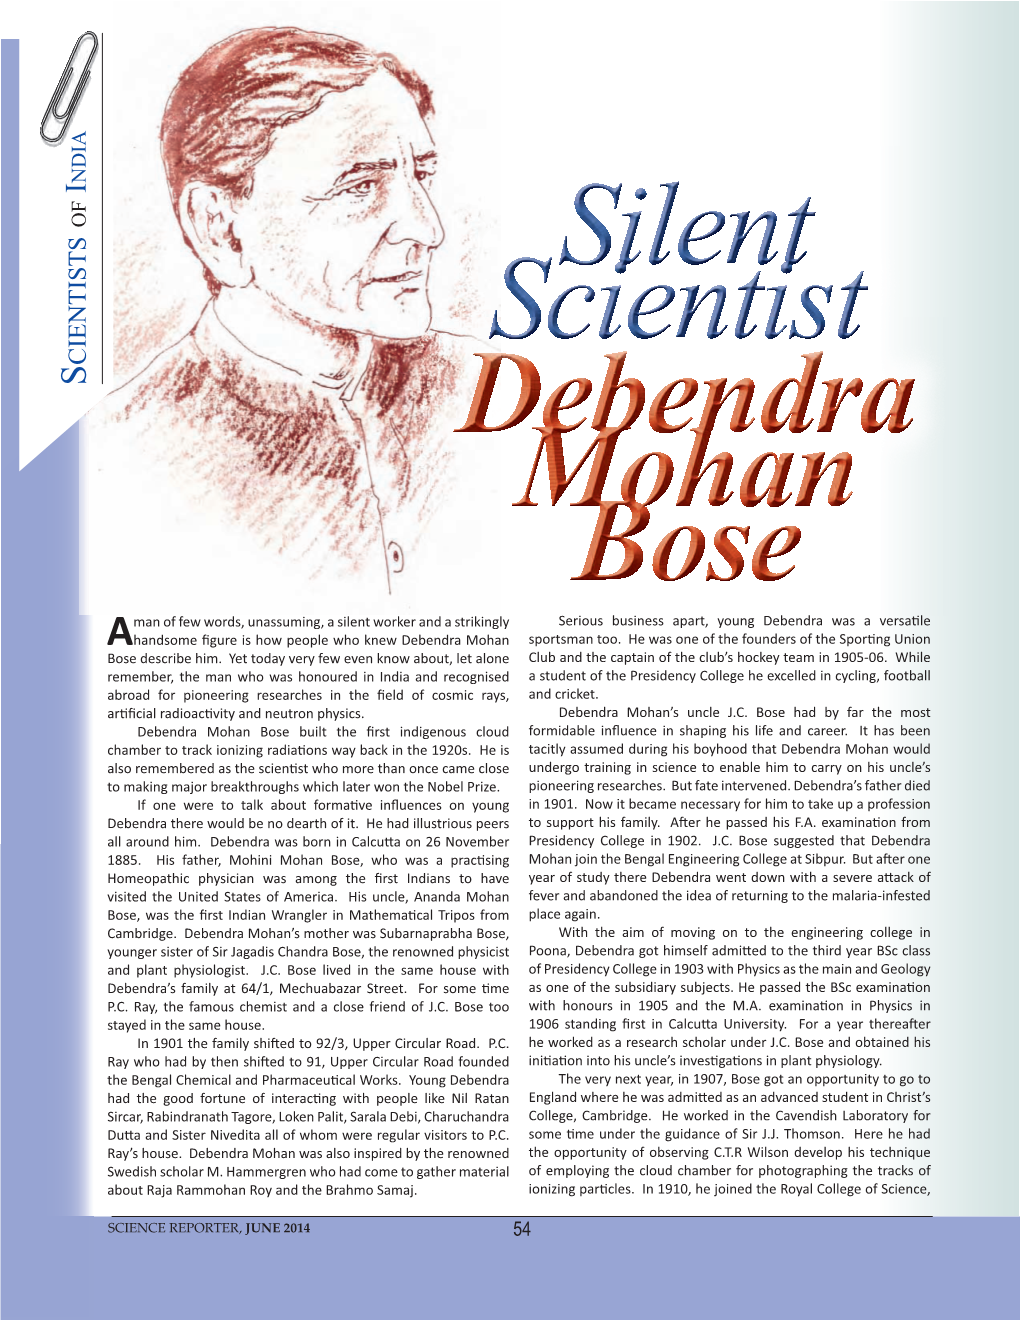 Debendra Mohan Bose Built the ﬁ Rst Indigenous Cloud Formidable Inﬂ Uence in Shaping His Life and Career